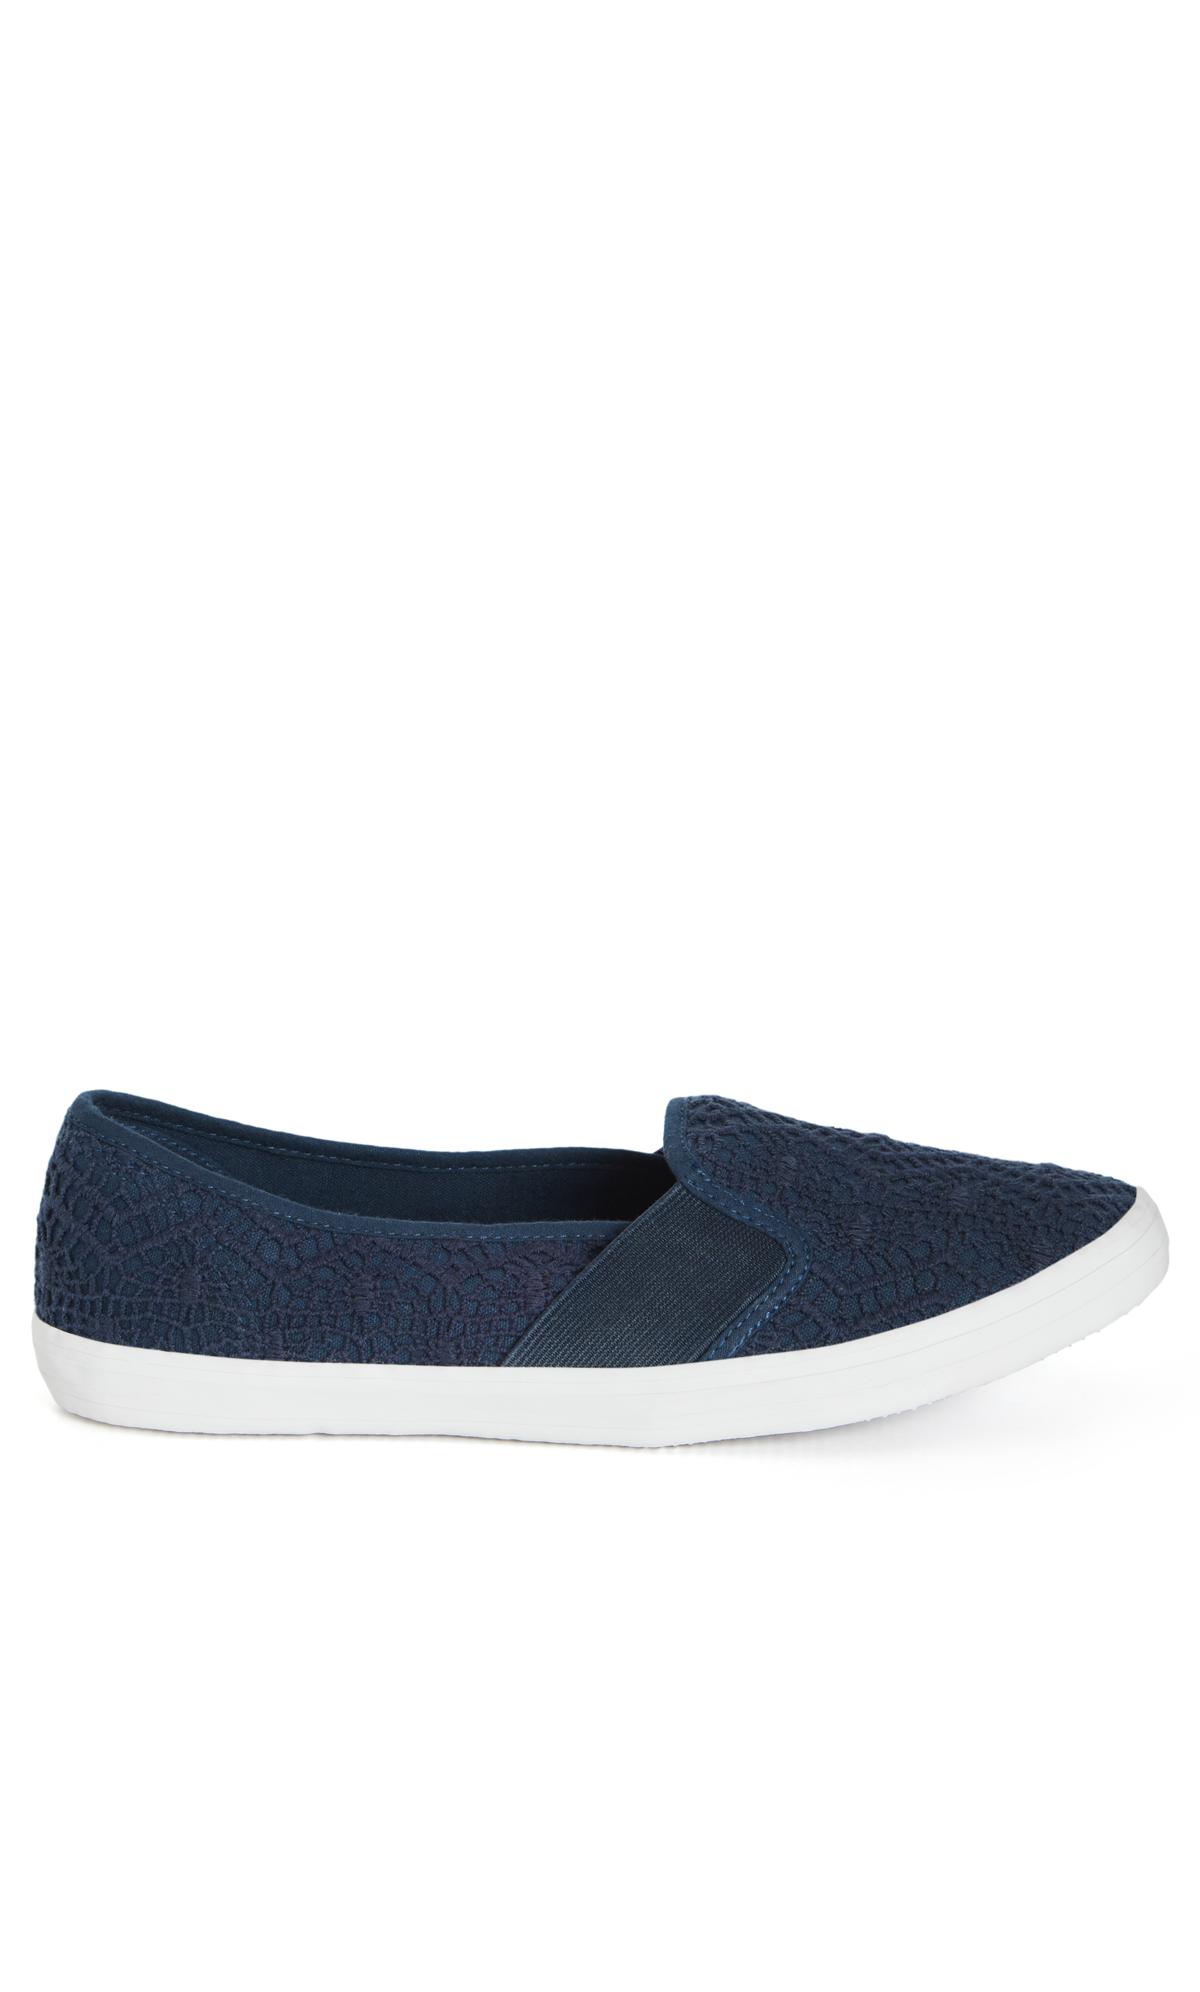 Evans WIDE FIT Navy Blue Broderie Anglaise Slip On Trainers 2